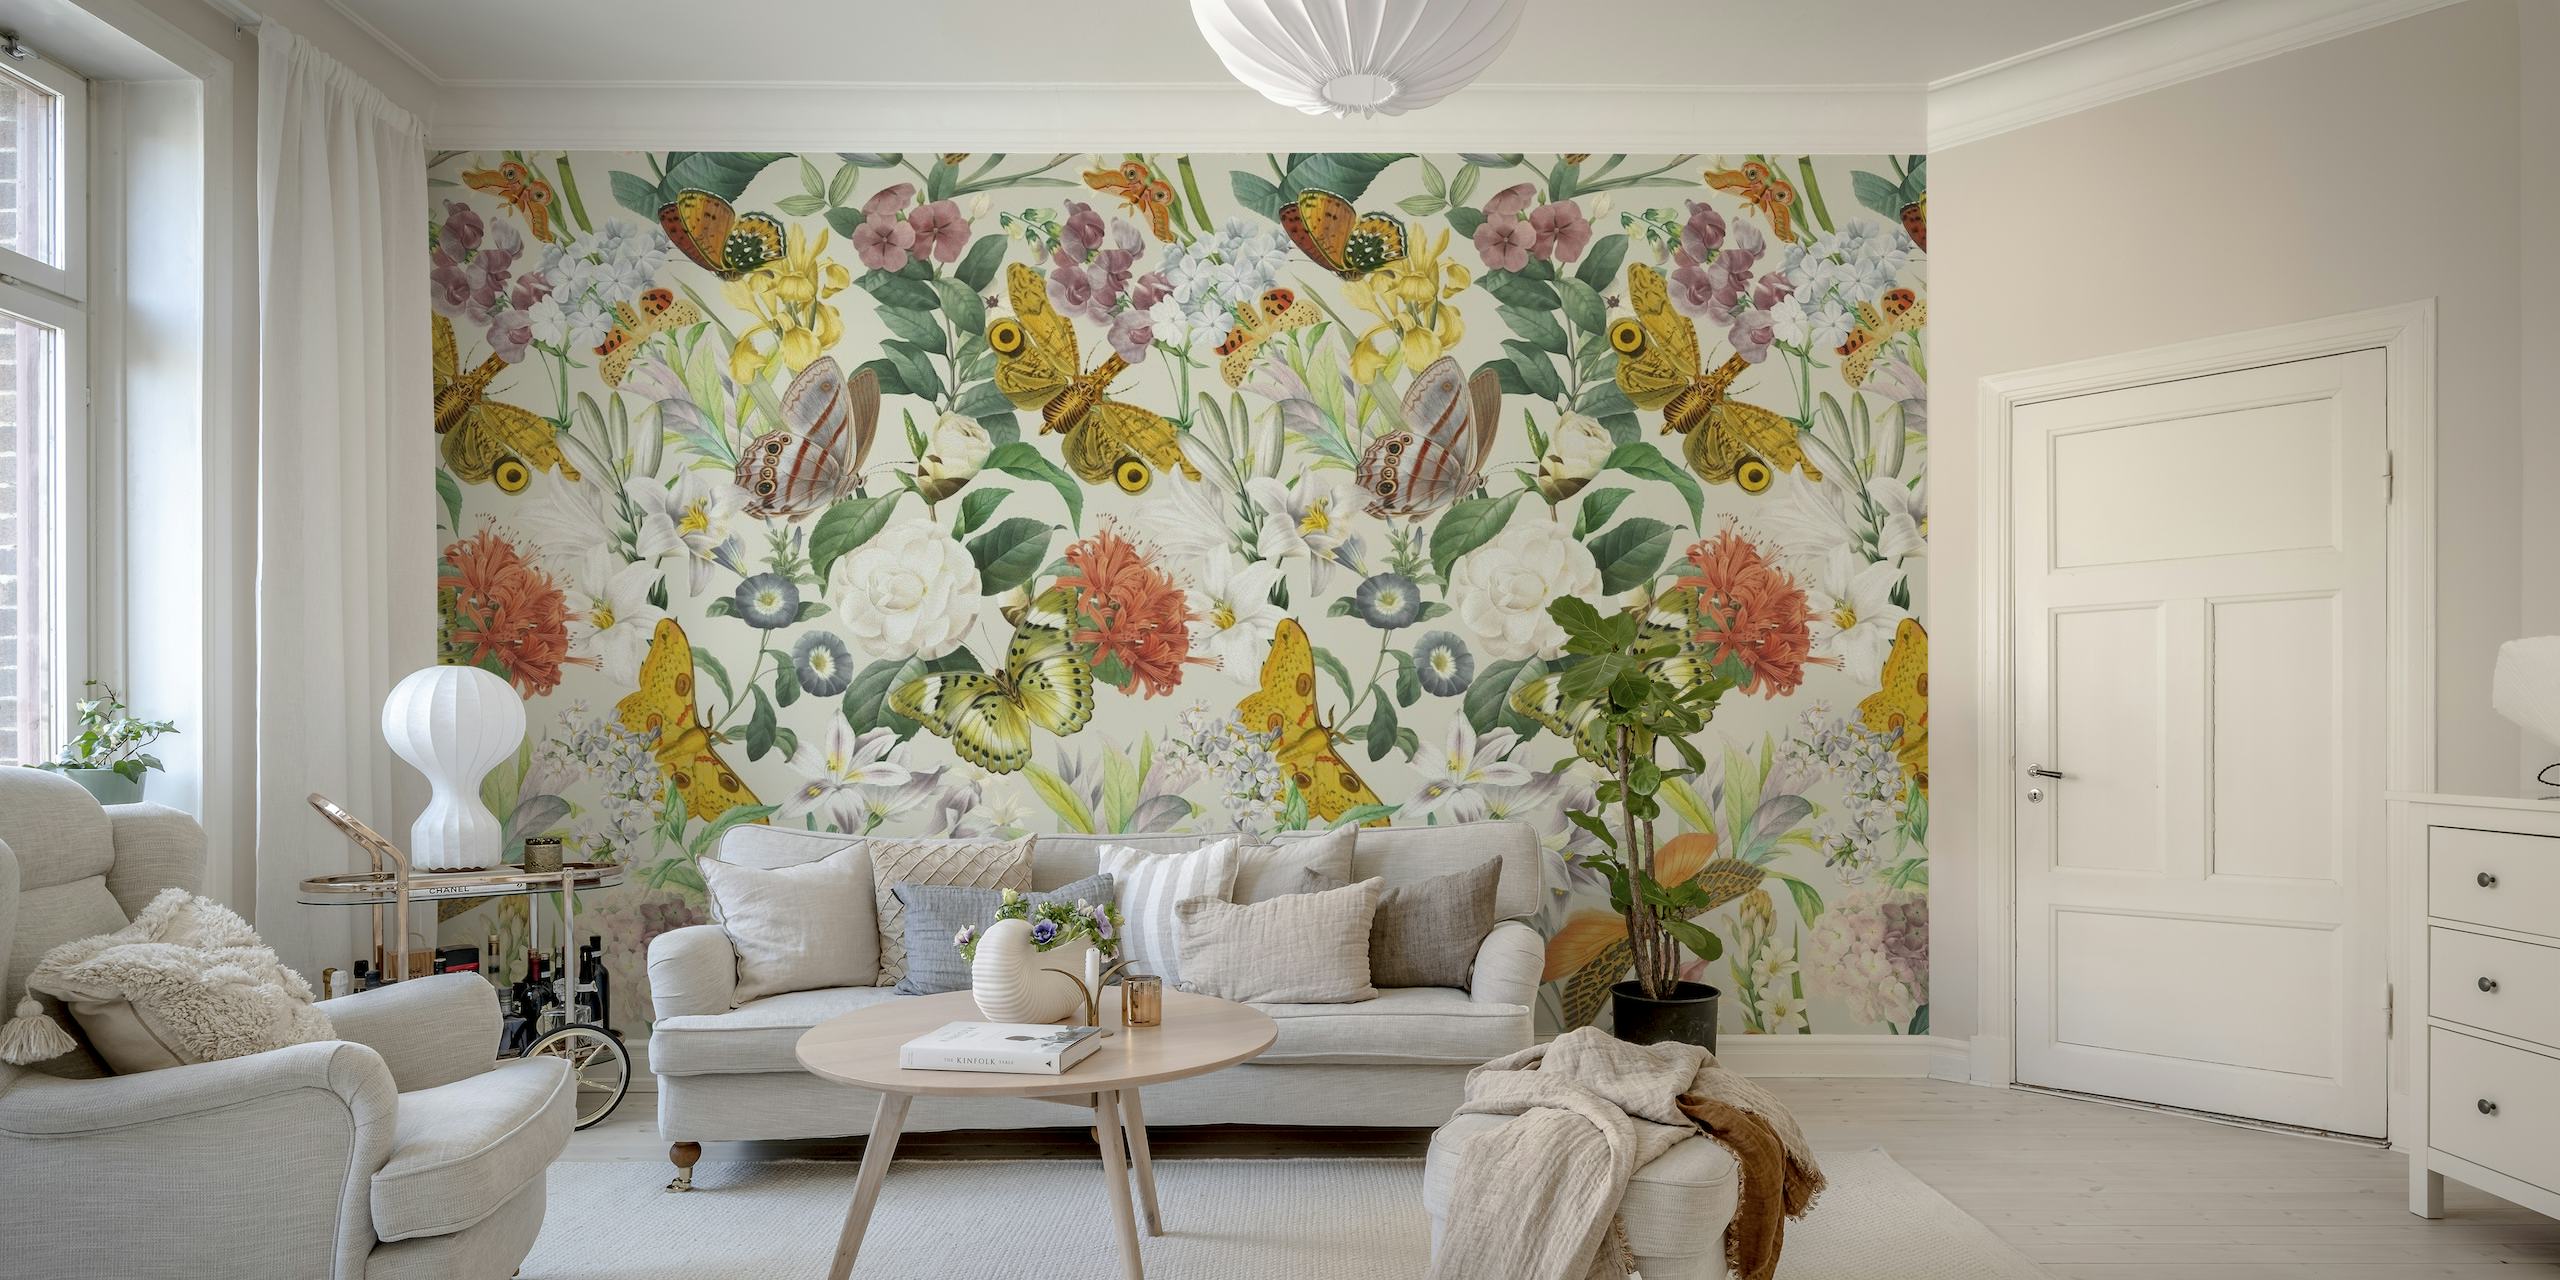 A wall mural with a beautiful pattern of moths, butterflies, and floral elements in soft pastel colors.